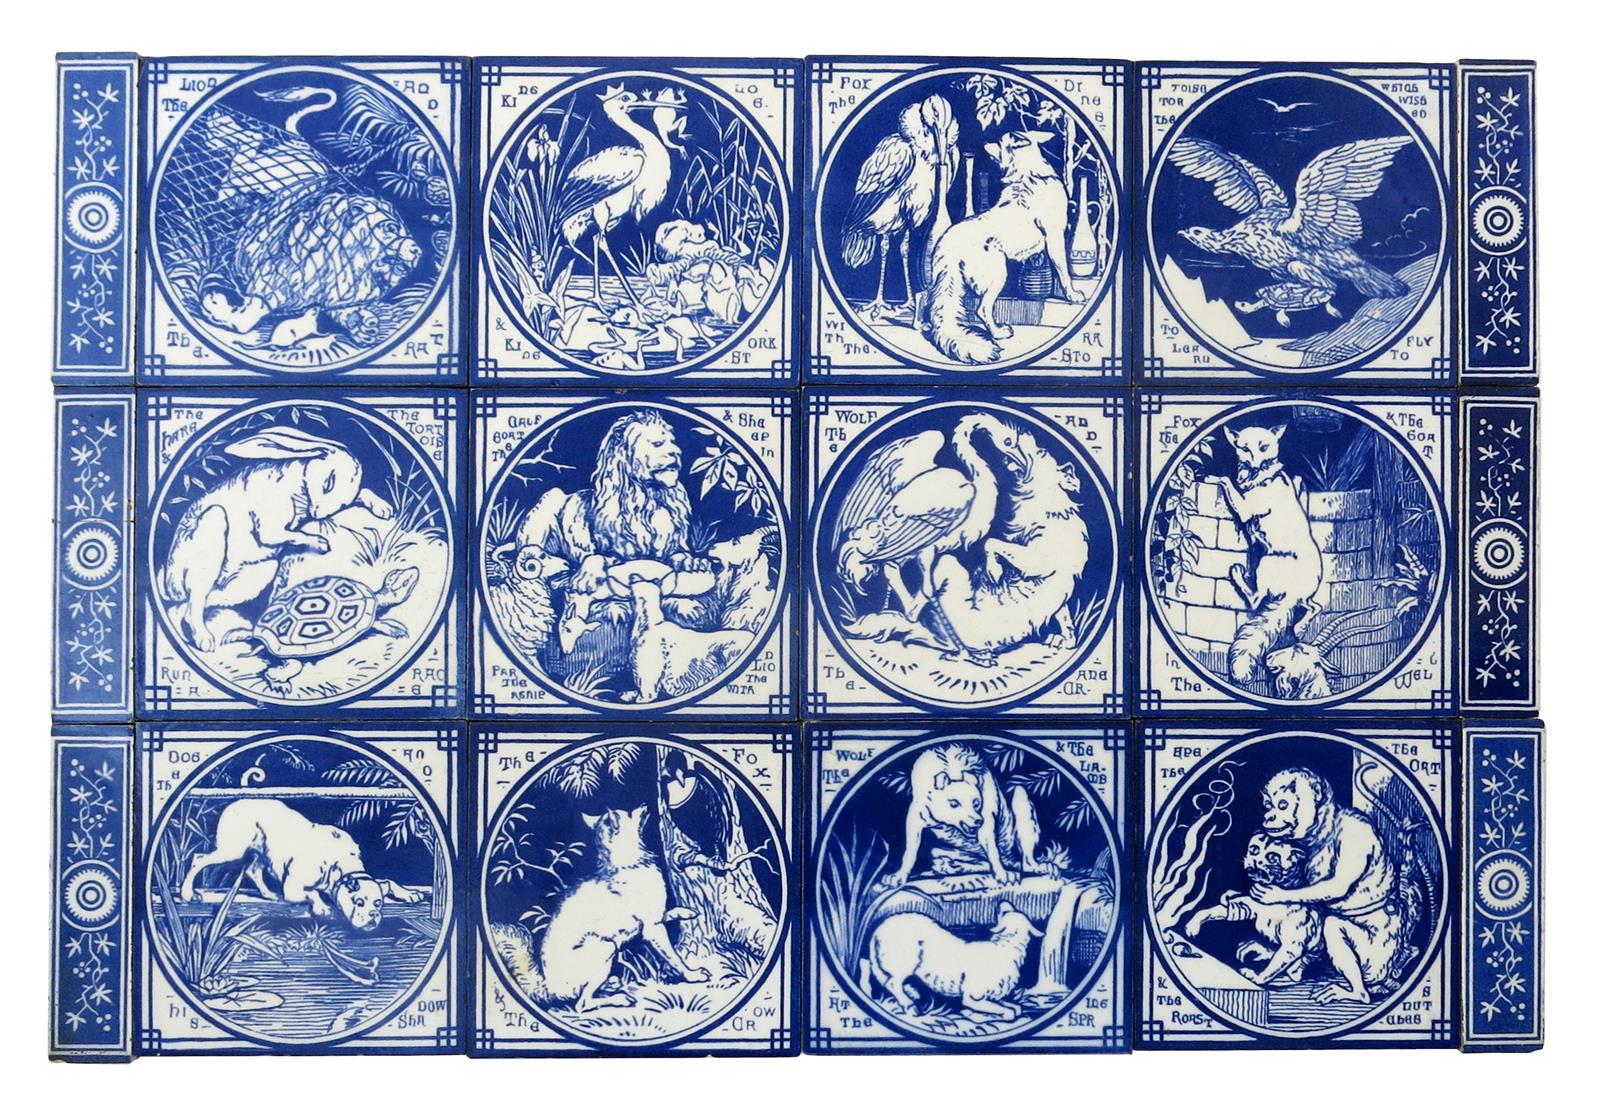 A Minton's Aesop's Fables twelve tile panel designed by John Moyr Smith, printed in blue on a